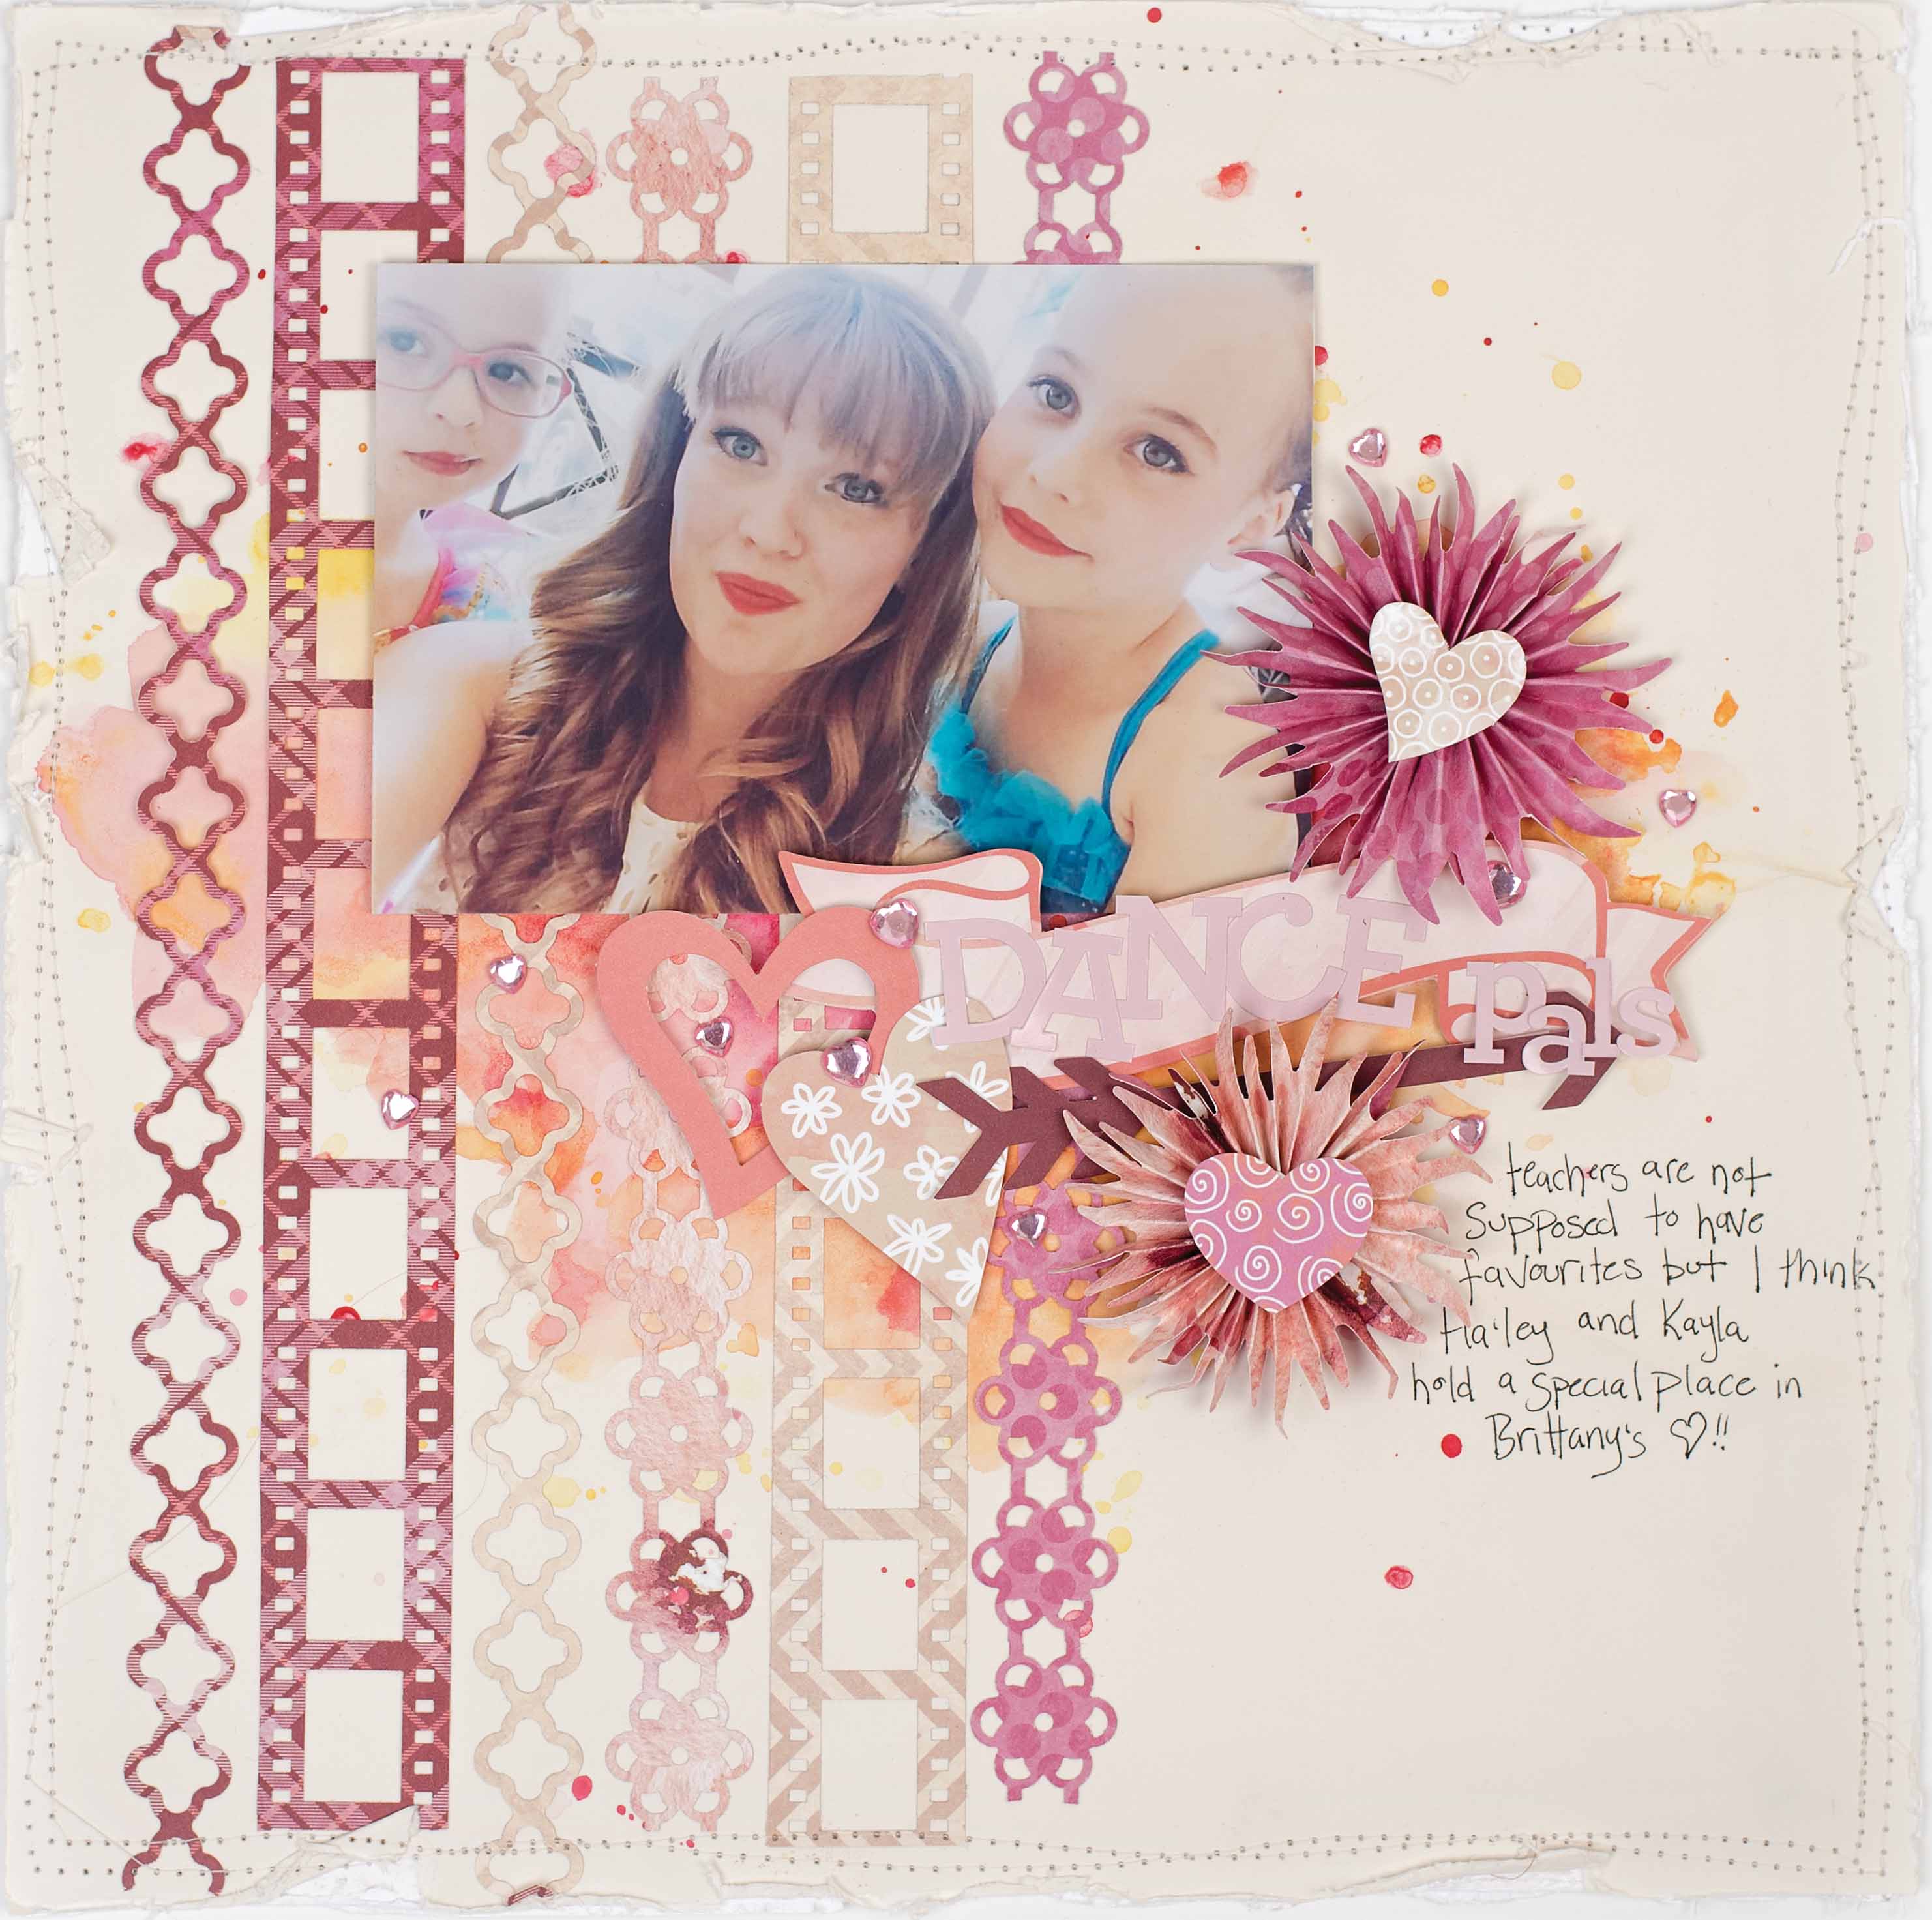 Scrapbook layout featuring border punches designed by Christy Riopel | Creative Scrapbooker Magazine